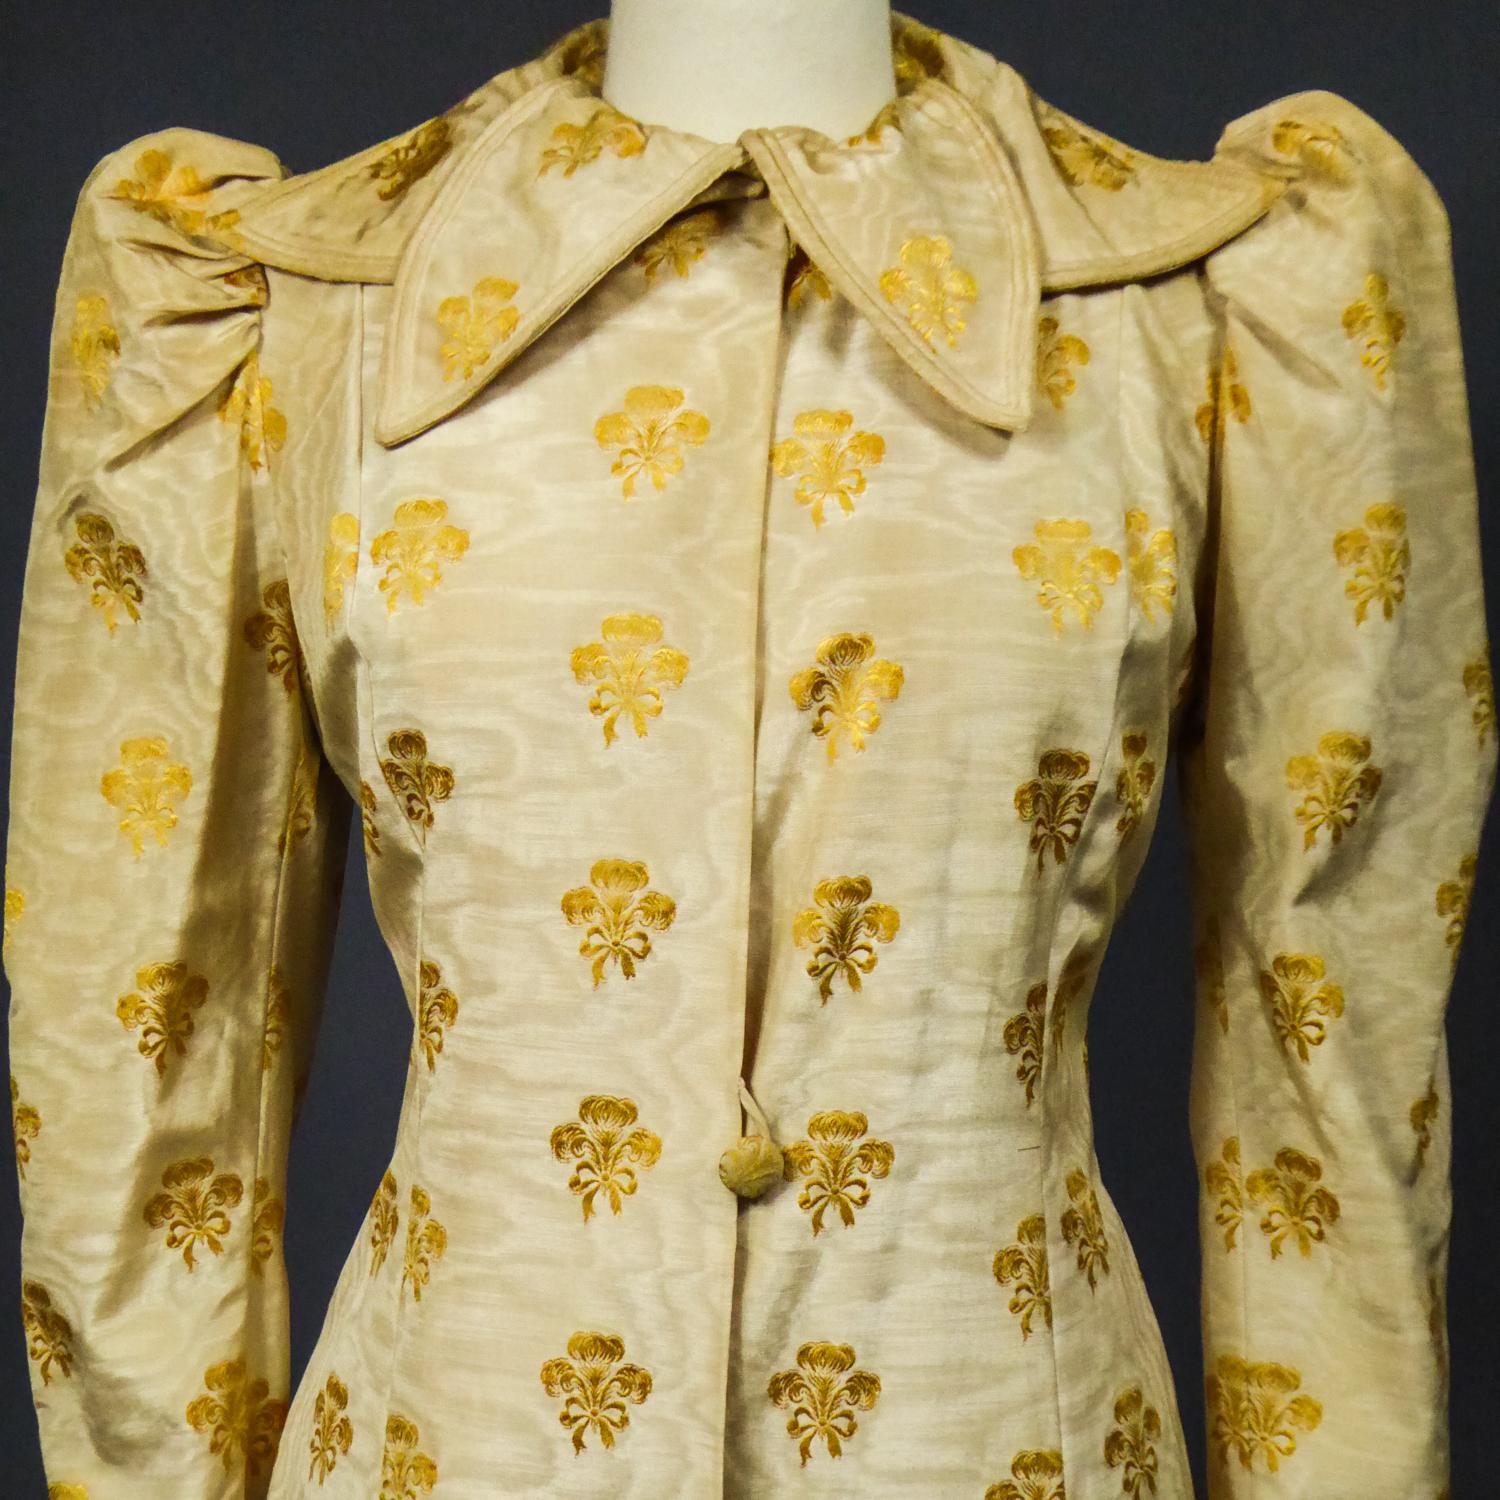 Circa 1935/1940
England

Amazing british evening or interior coat in straw-yellow silk moire brocaded in gold and dating from the years 1935/1940. Rich silk façonné with golden trimmed bunches recalling a stylized fleur-de-lis on a straw-yellow silk